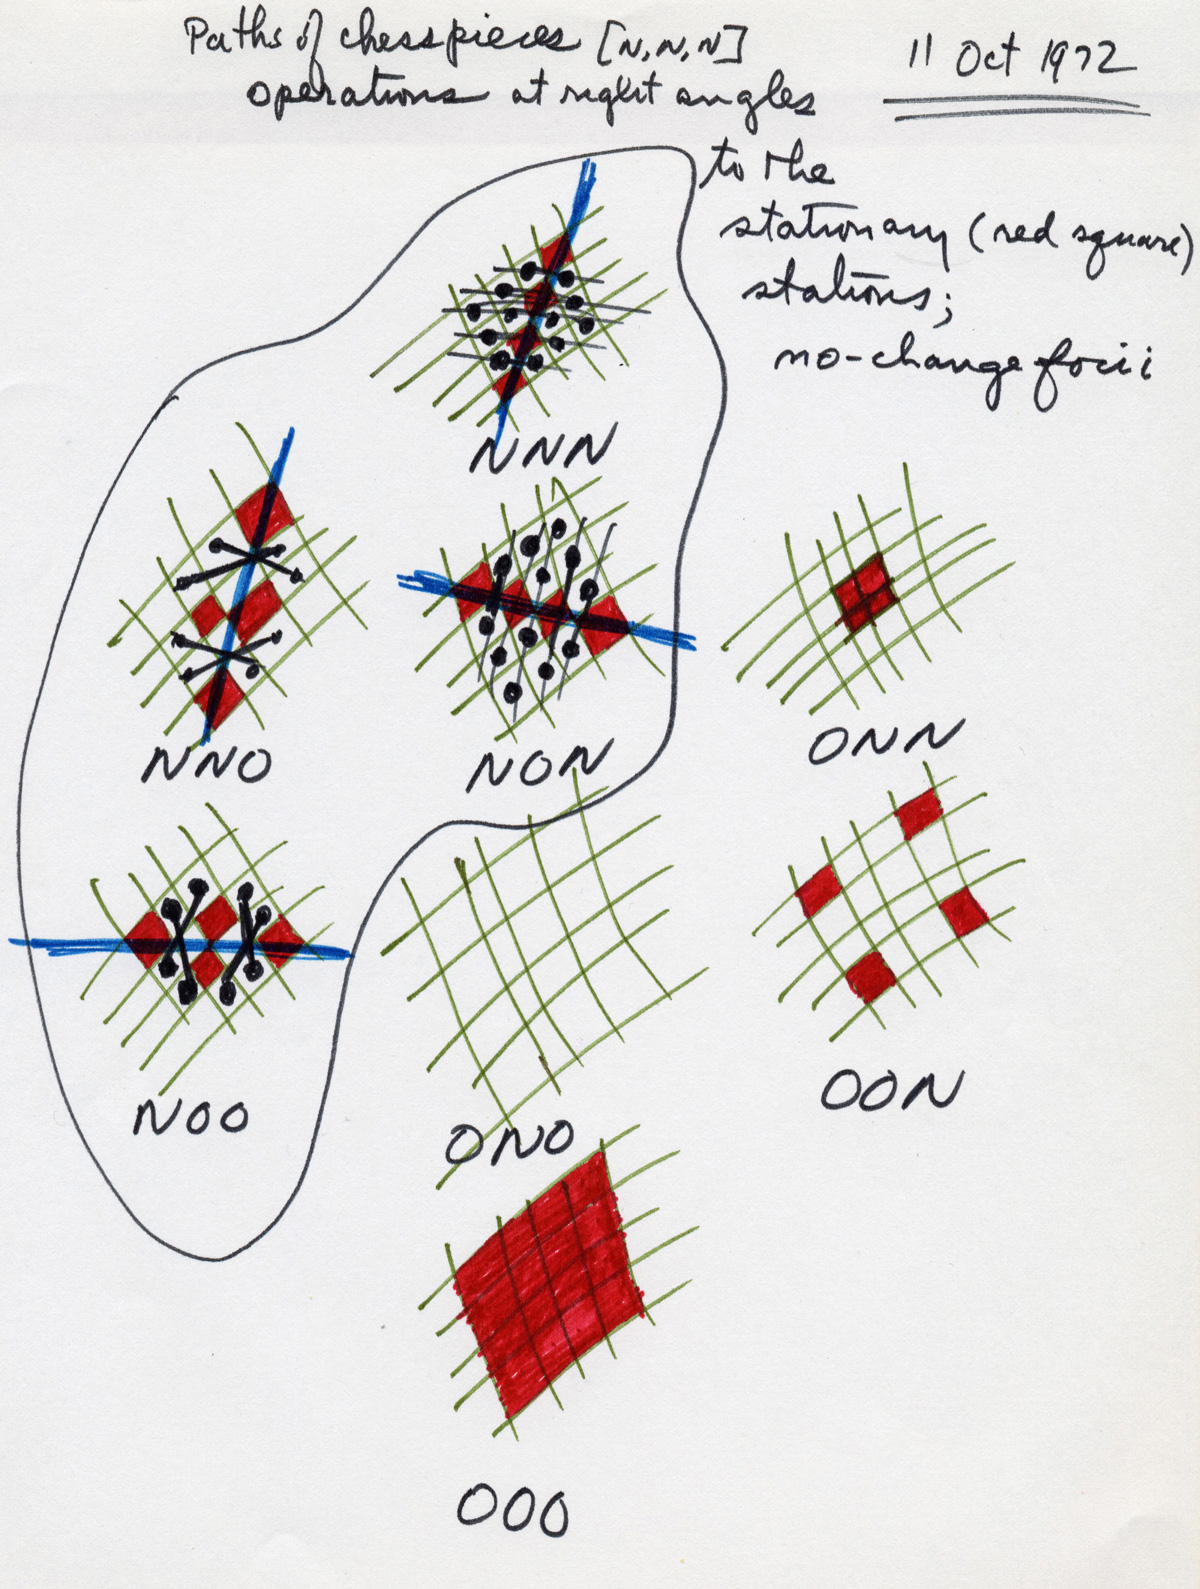 A page of Zellweger’s complex linguistic notations and diagrams, dated October 11, 1972.